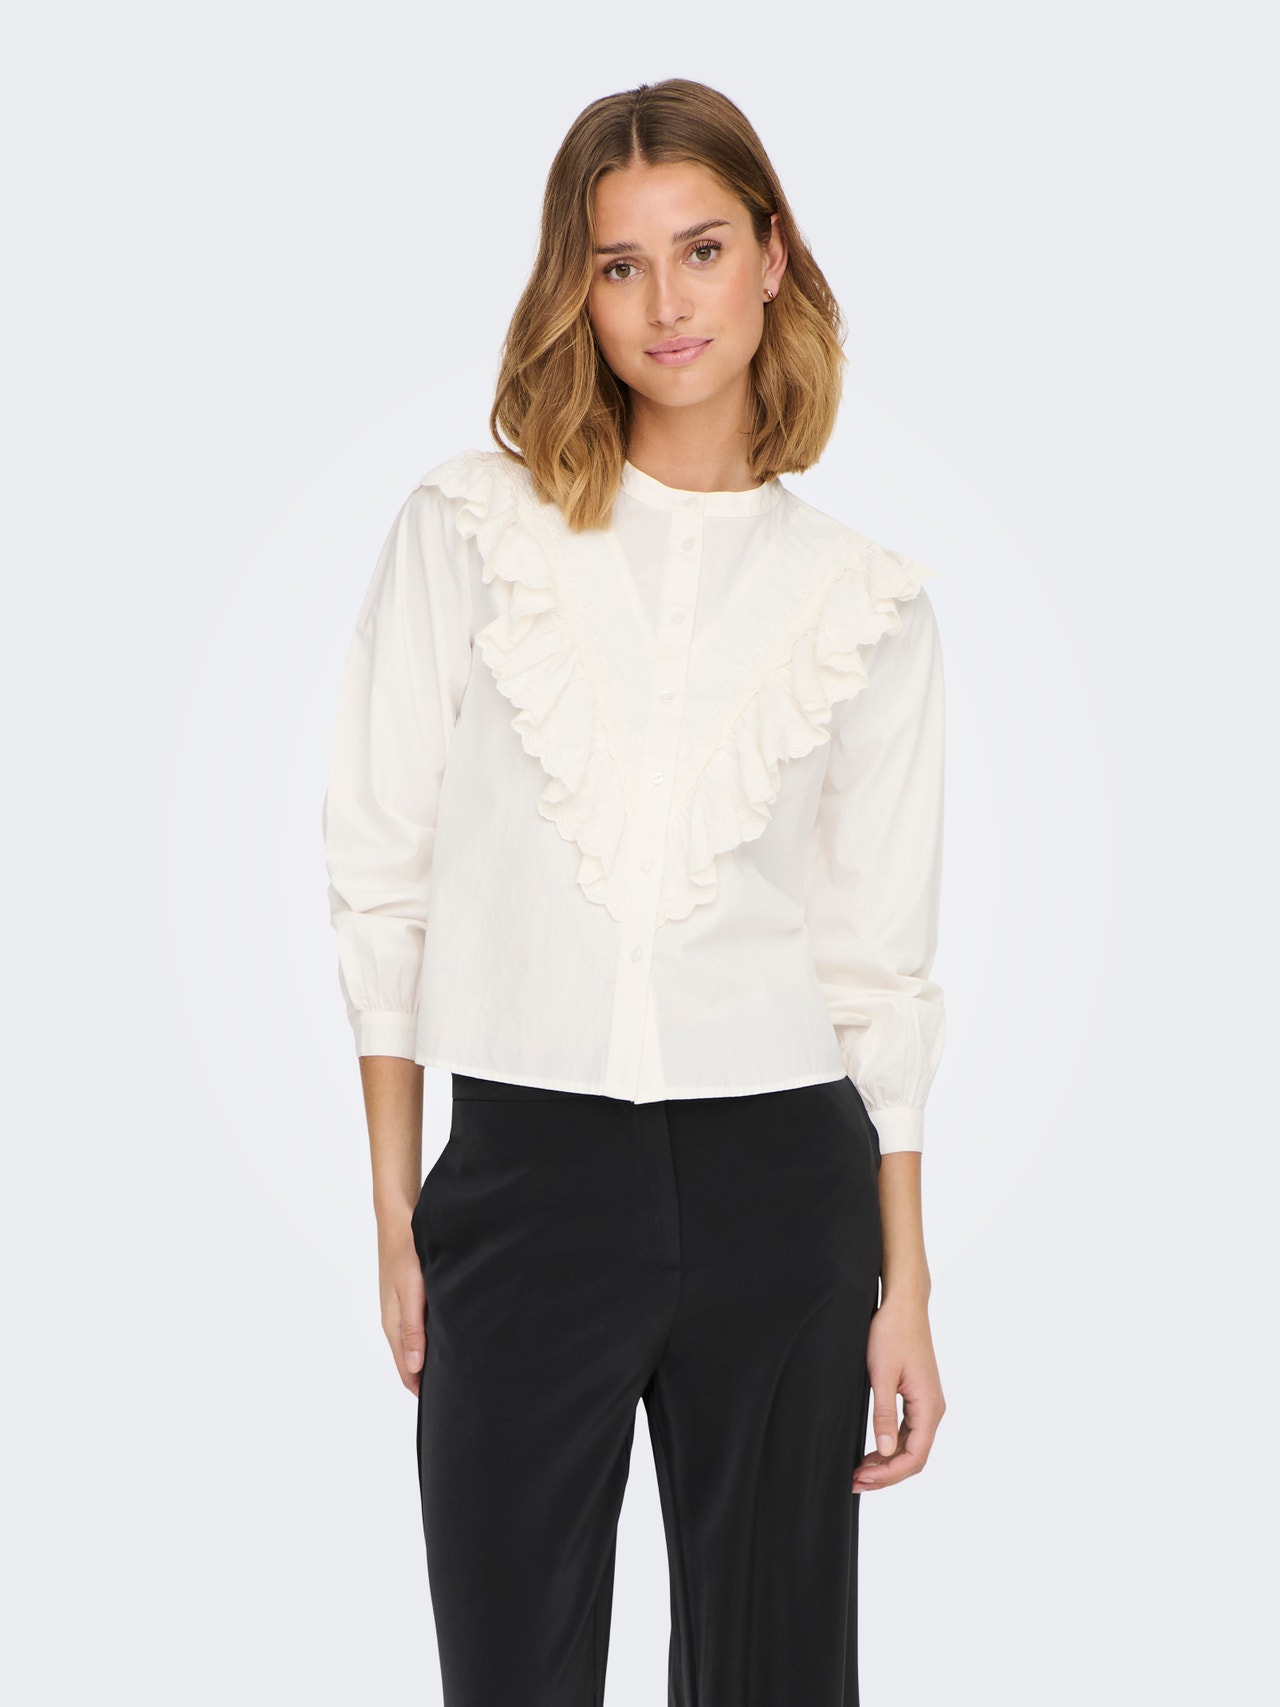 ONLY shirt with lace detail -Cloud Dancer - 15281526